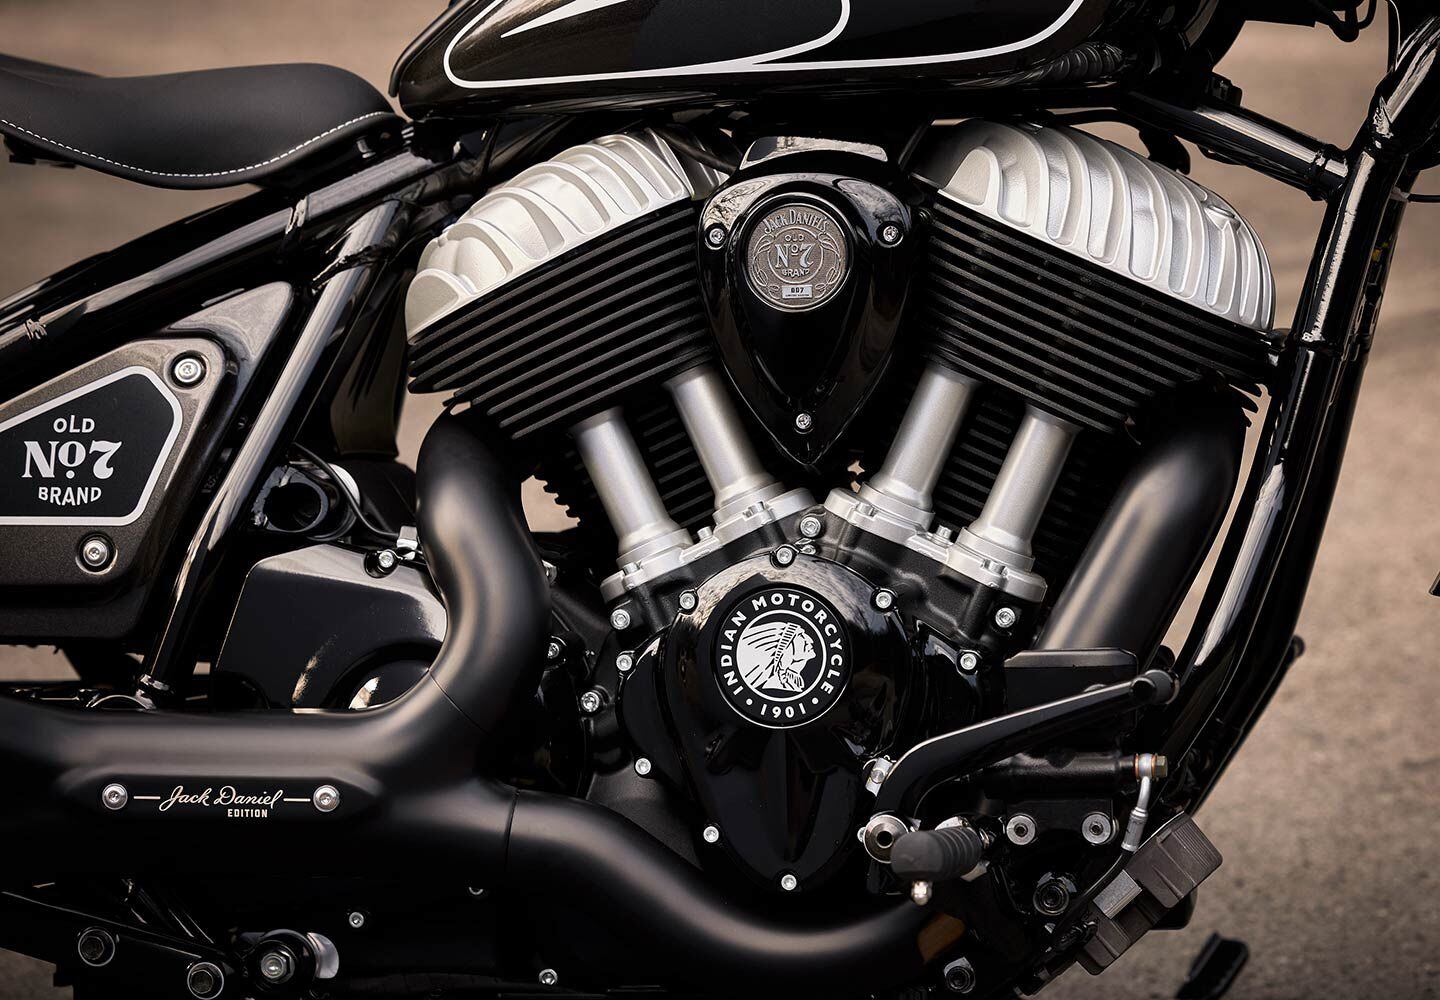 The blacked-out Thunderstroke 116 engine carries over from the Chief Dark Horse unchanged, save for cosmetic treatment on the cylinders and heads. Jack Daniel’s Montana Silversmiths badges tucked between the jugs display each bike’s unique serial number.